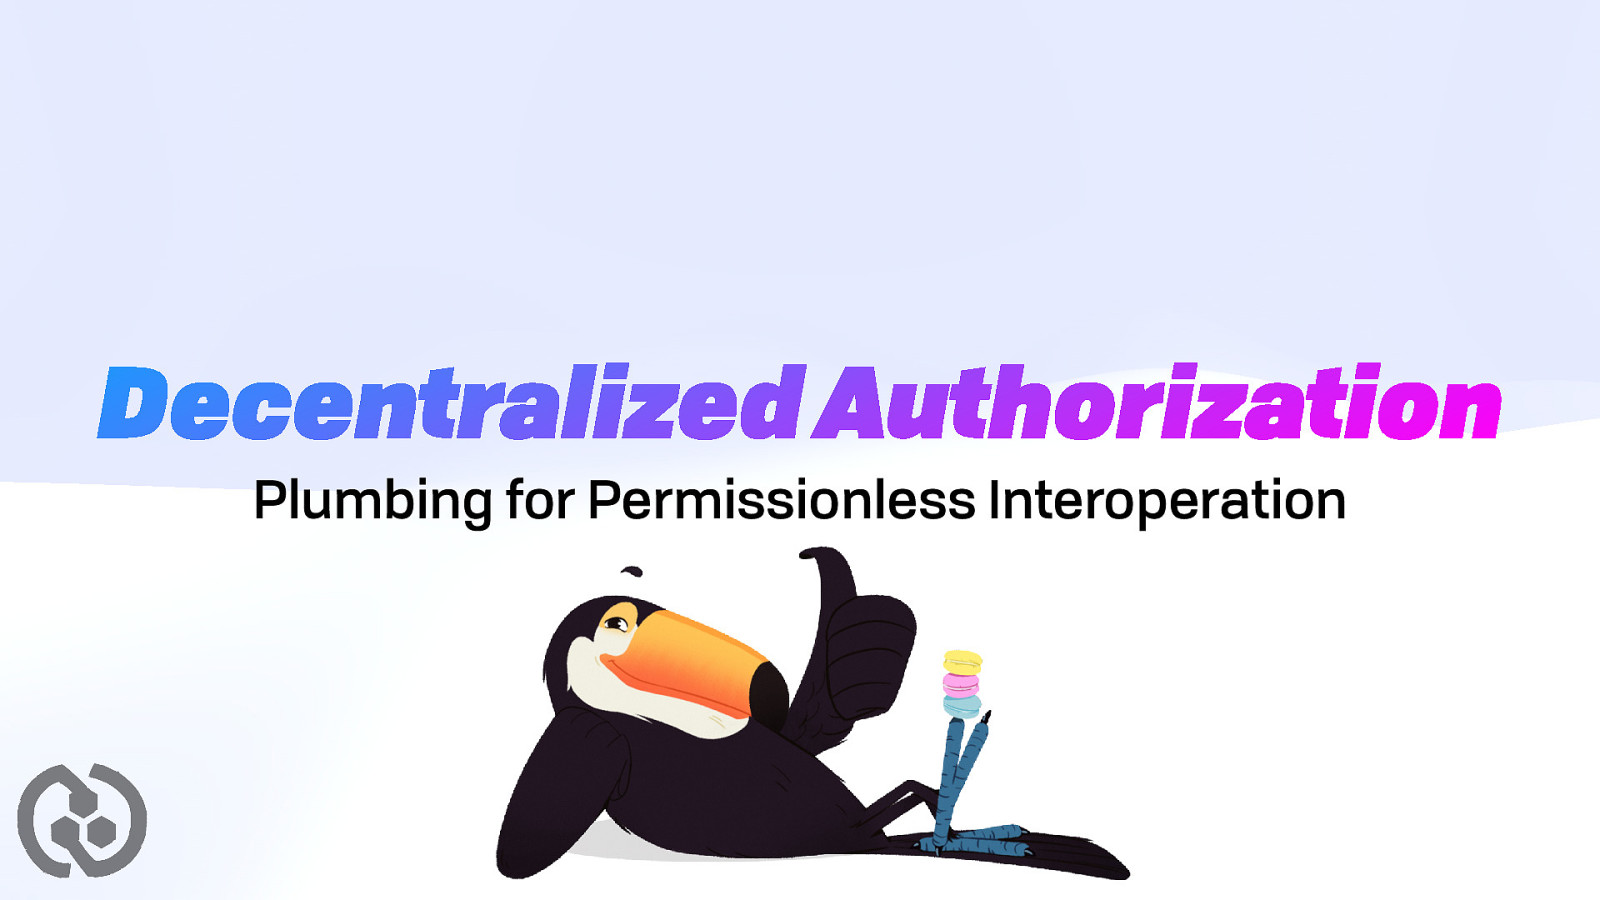 Decentralized Authorization: Plumbing for Permissionless Interoperation